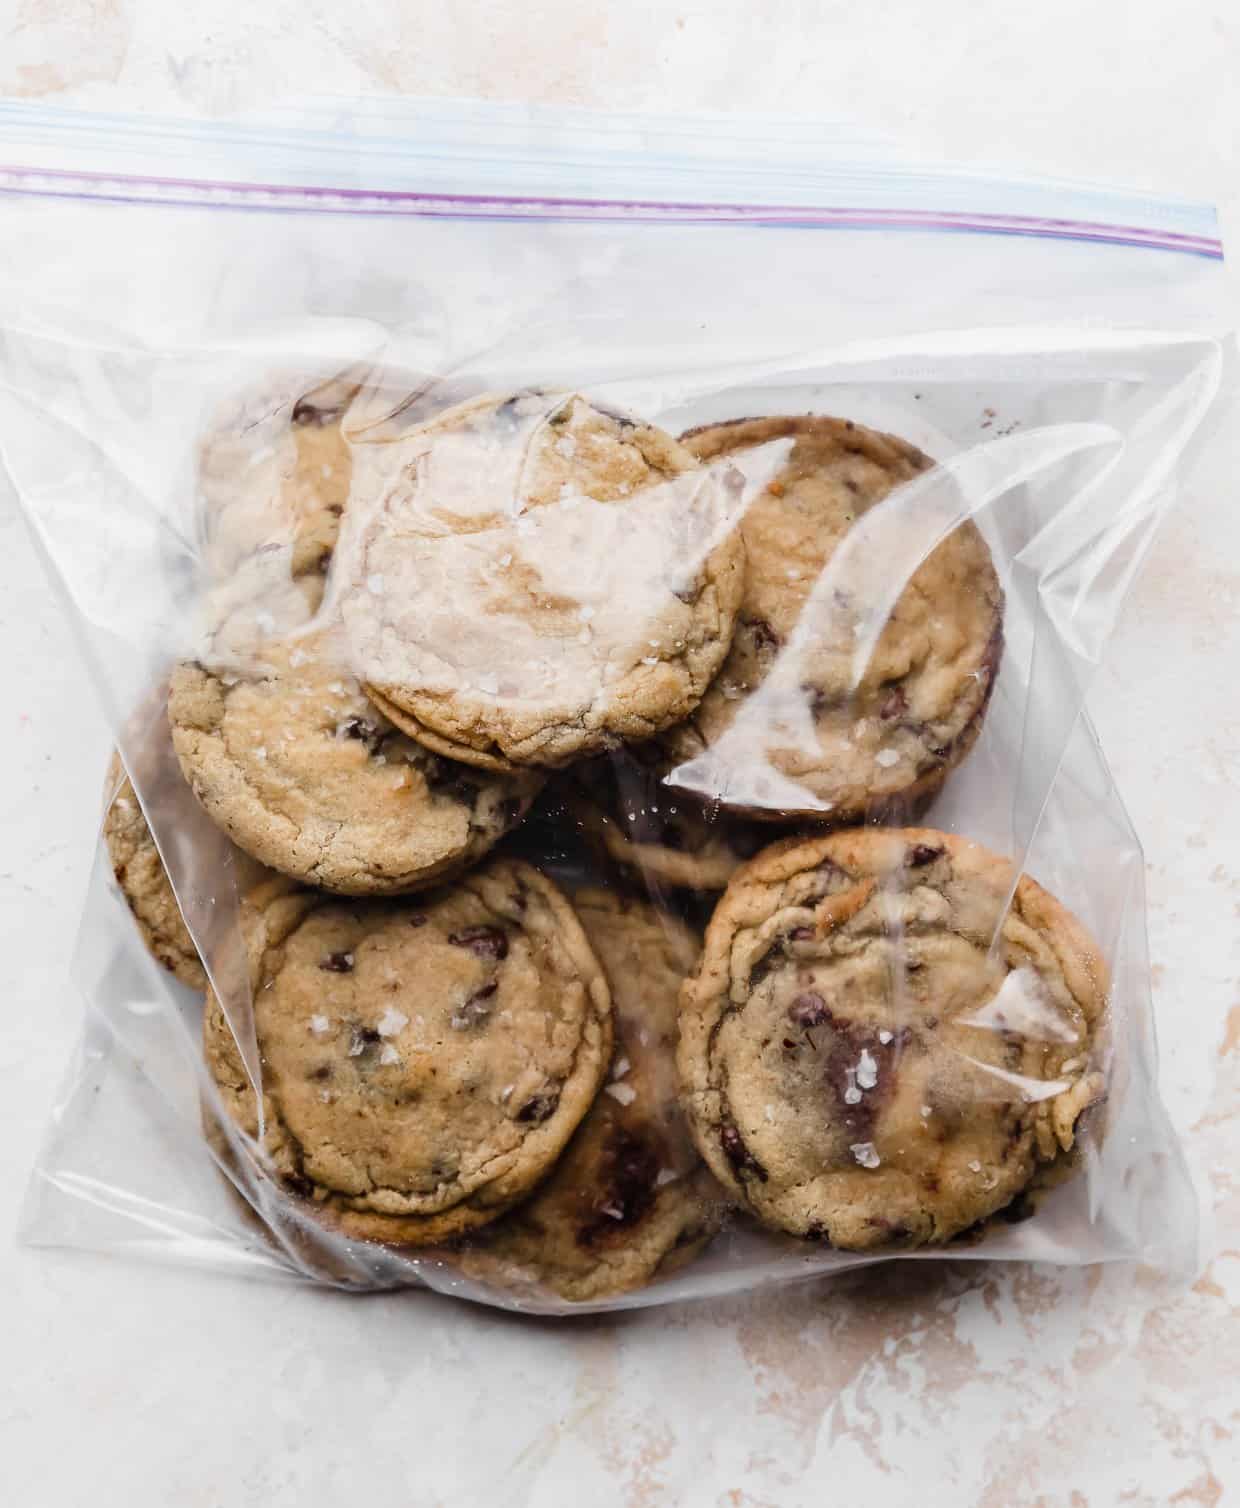 A ziplock bag filled with baked chocolate chip cookies.